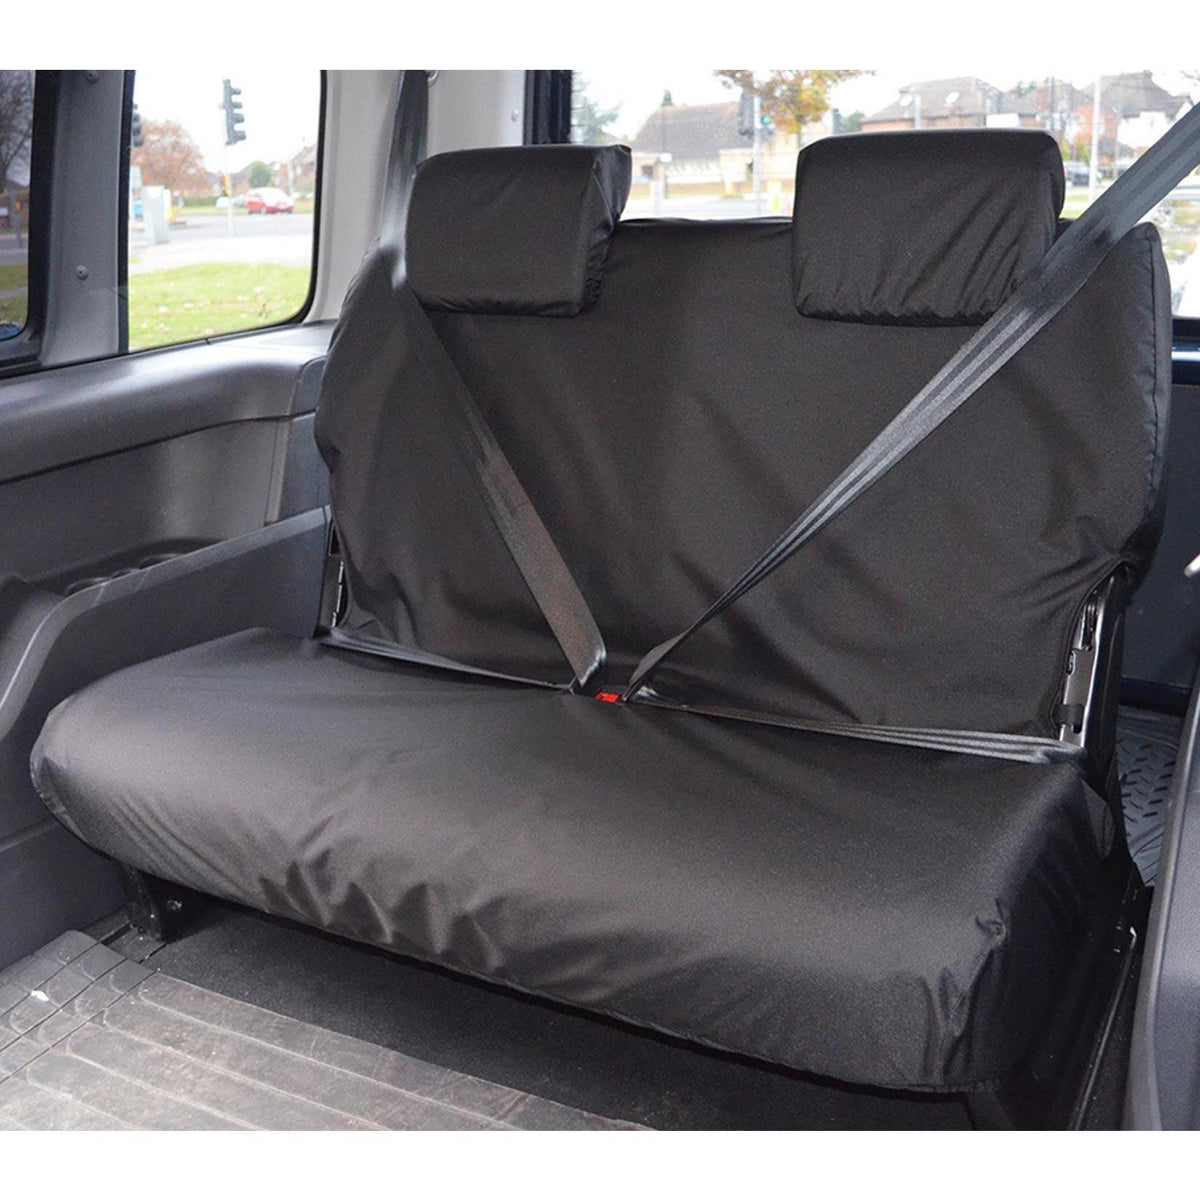 VW CADDY 2004-2021 3RD ROW SEAT COVERS - BLACK - Storm Xccessories2